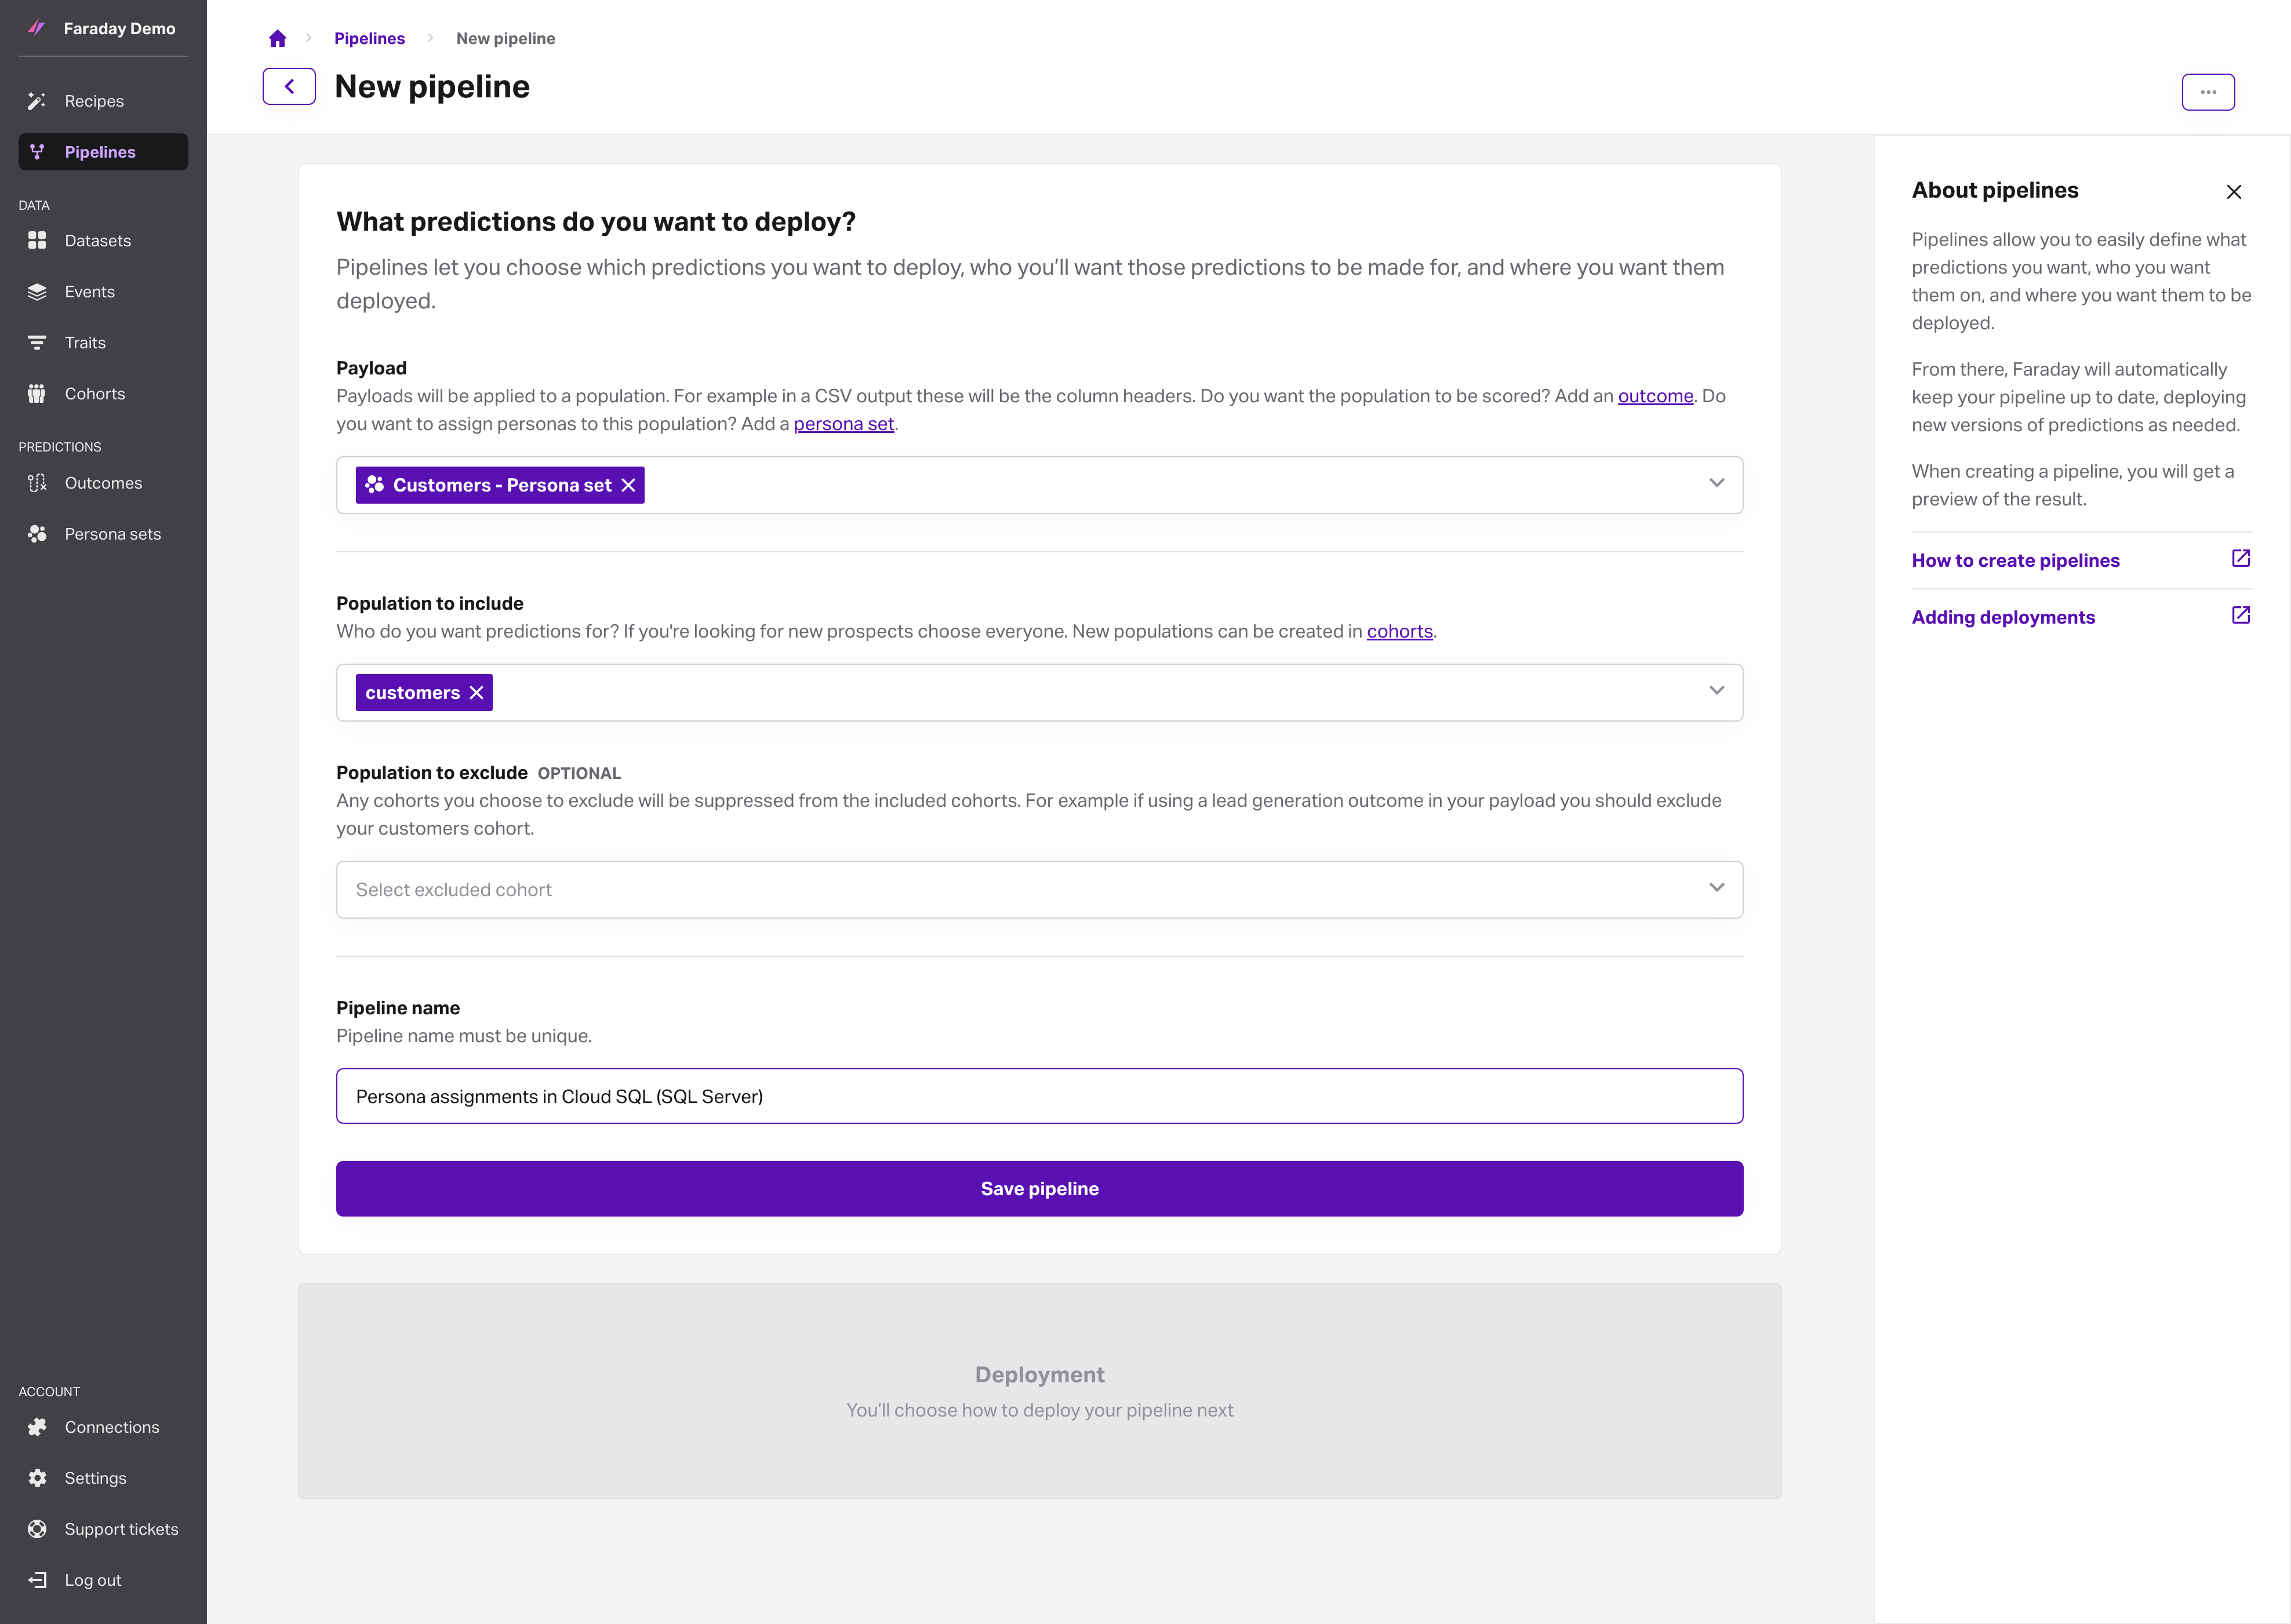 Screenshot of the new pipeline form, filled out